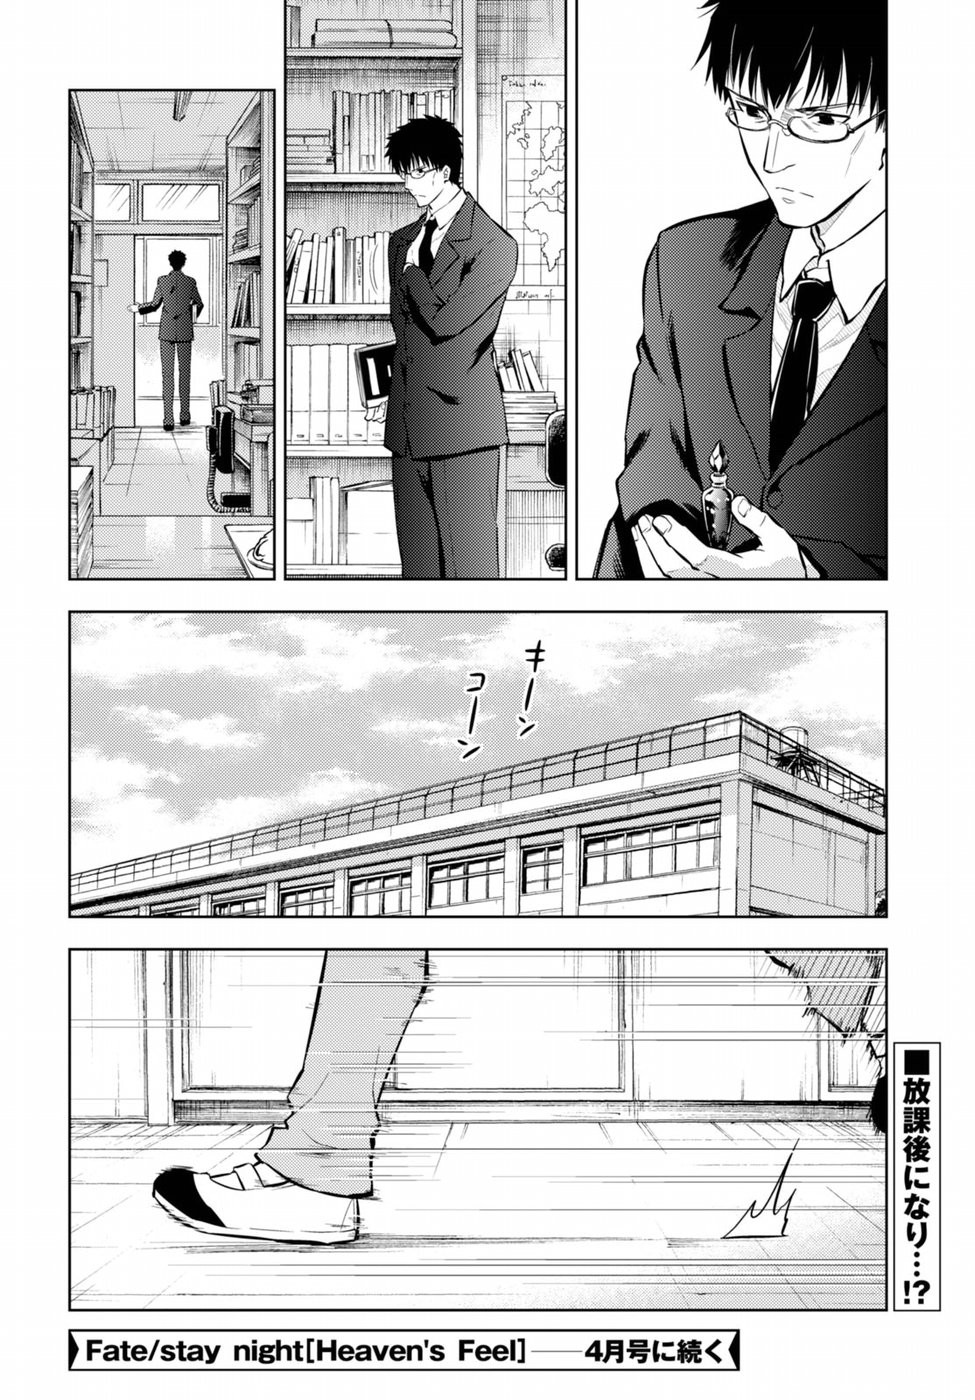 Fate/Stay night Heaven's Feel - Chapter 22 - Page 33